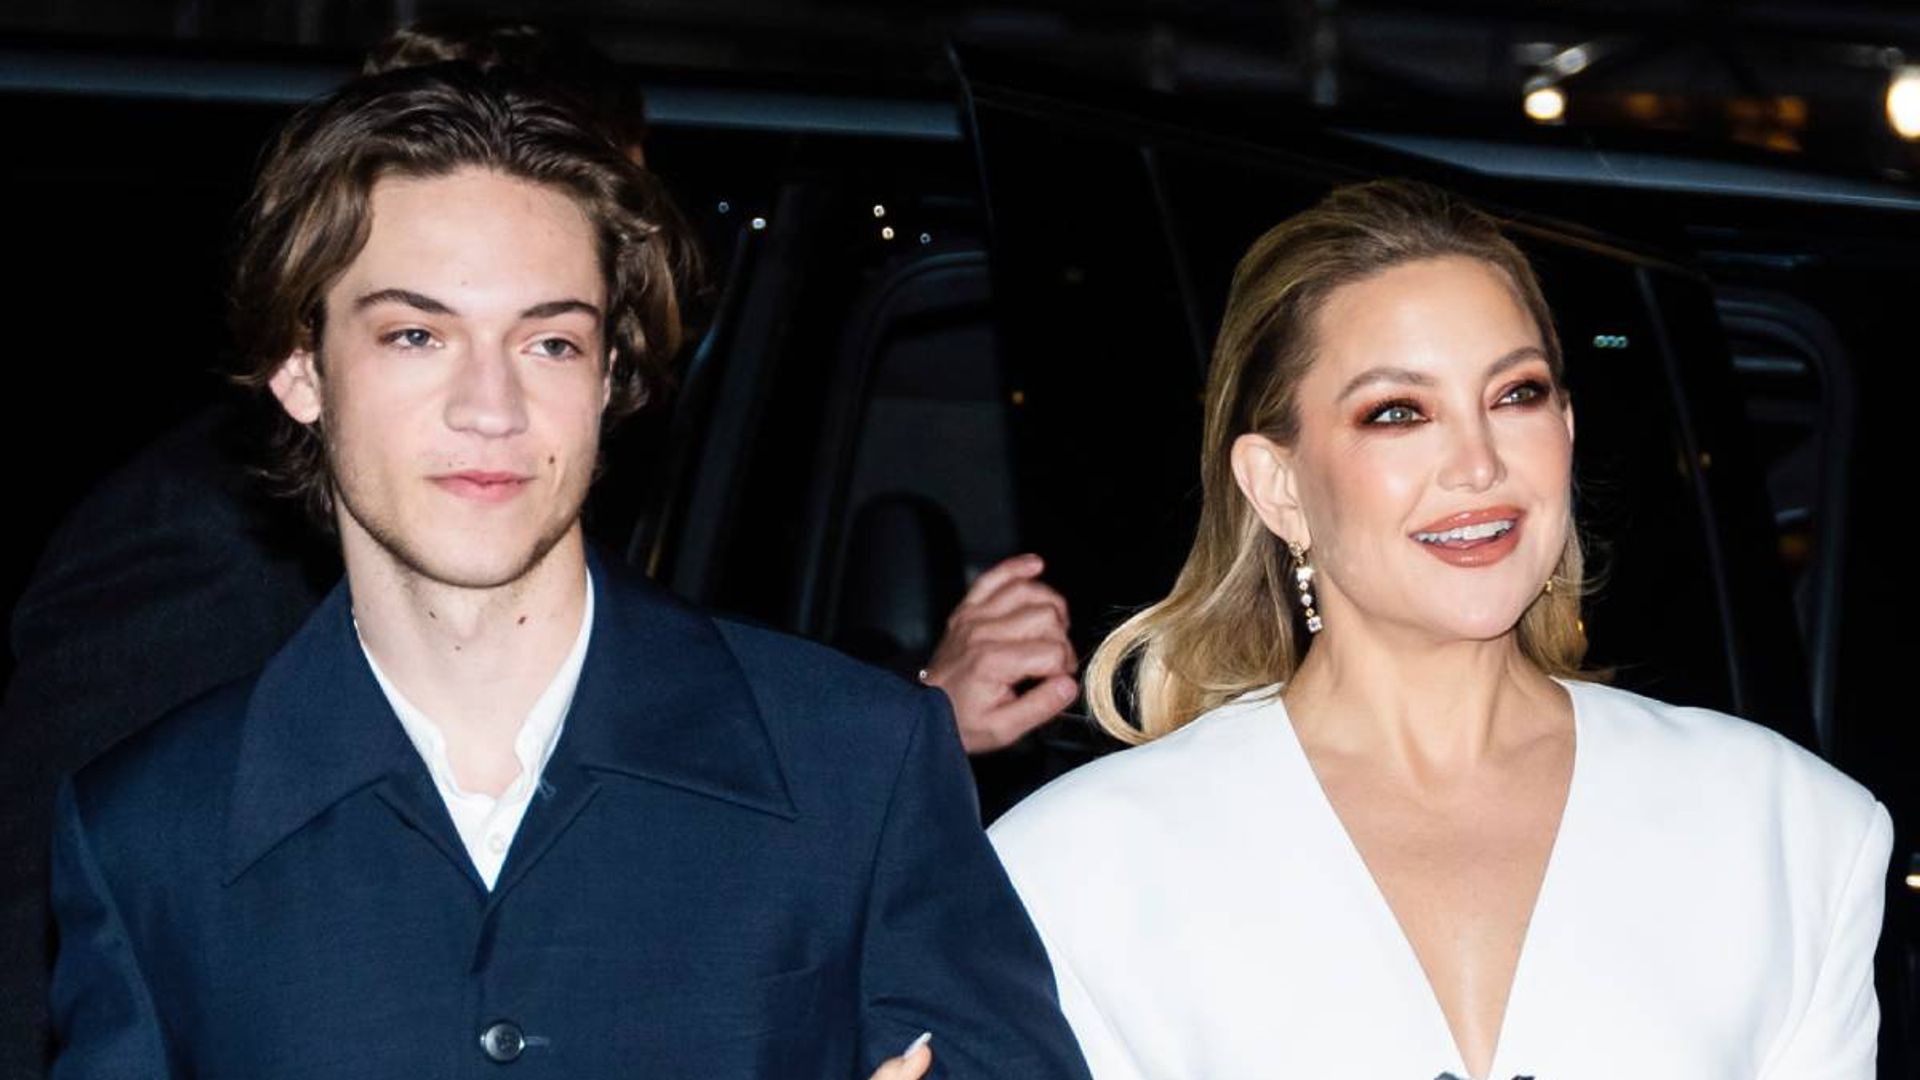 Kate Hudson's Family: All About Her Famous Parents and Siblings